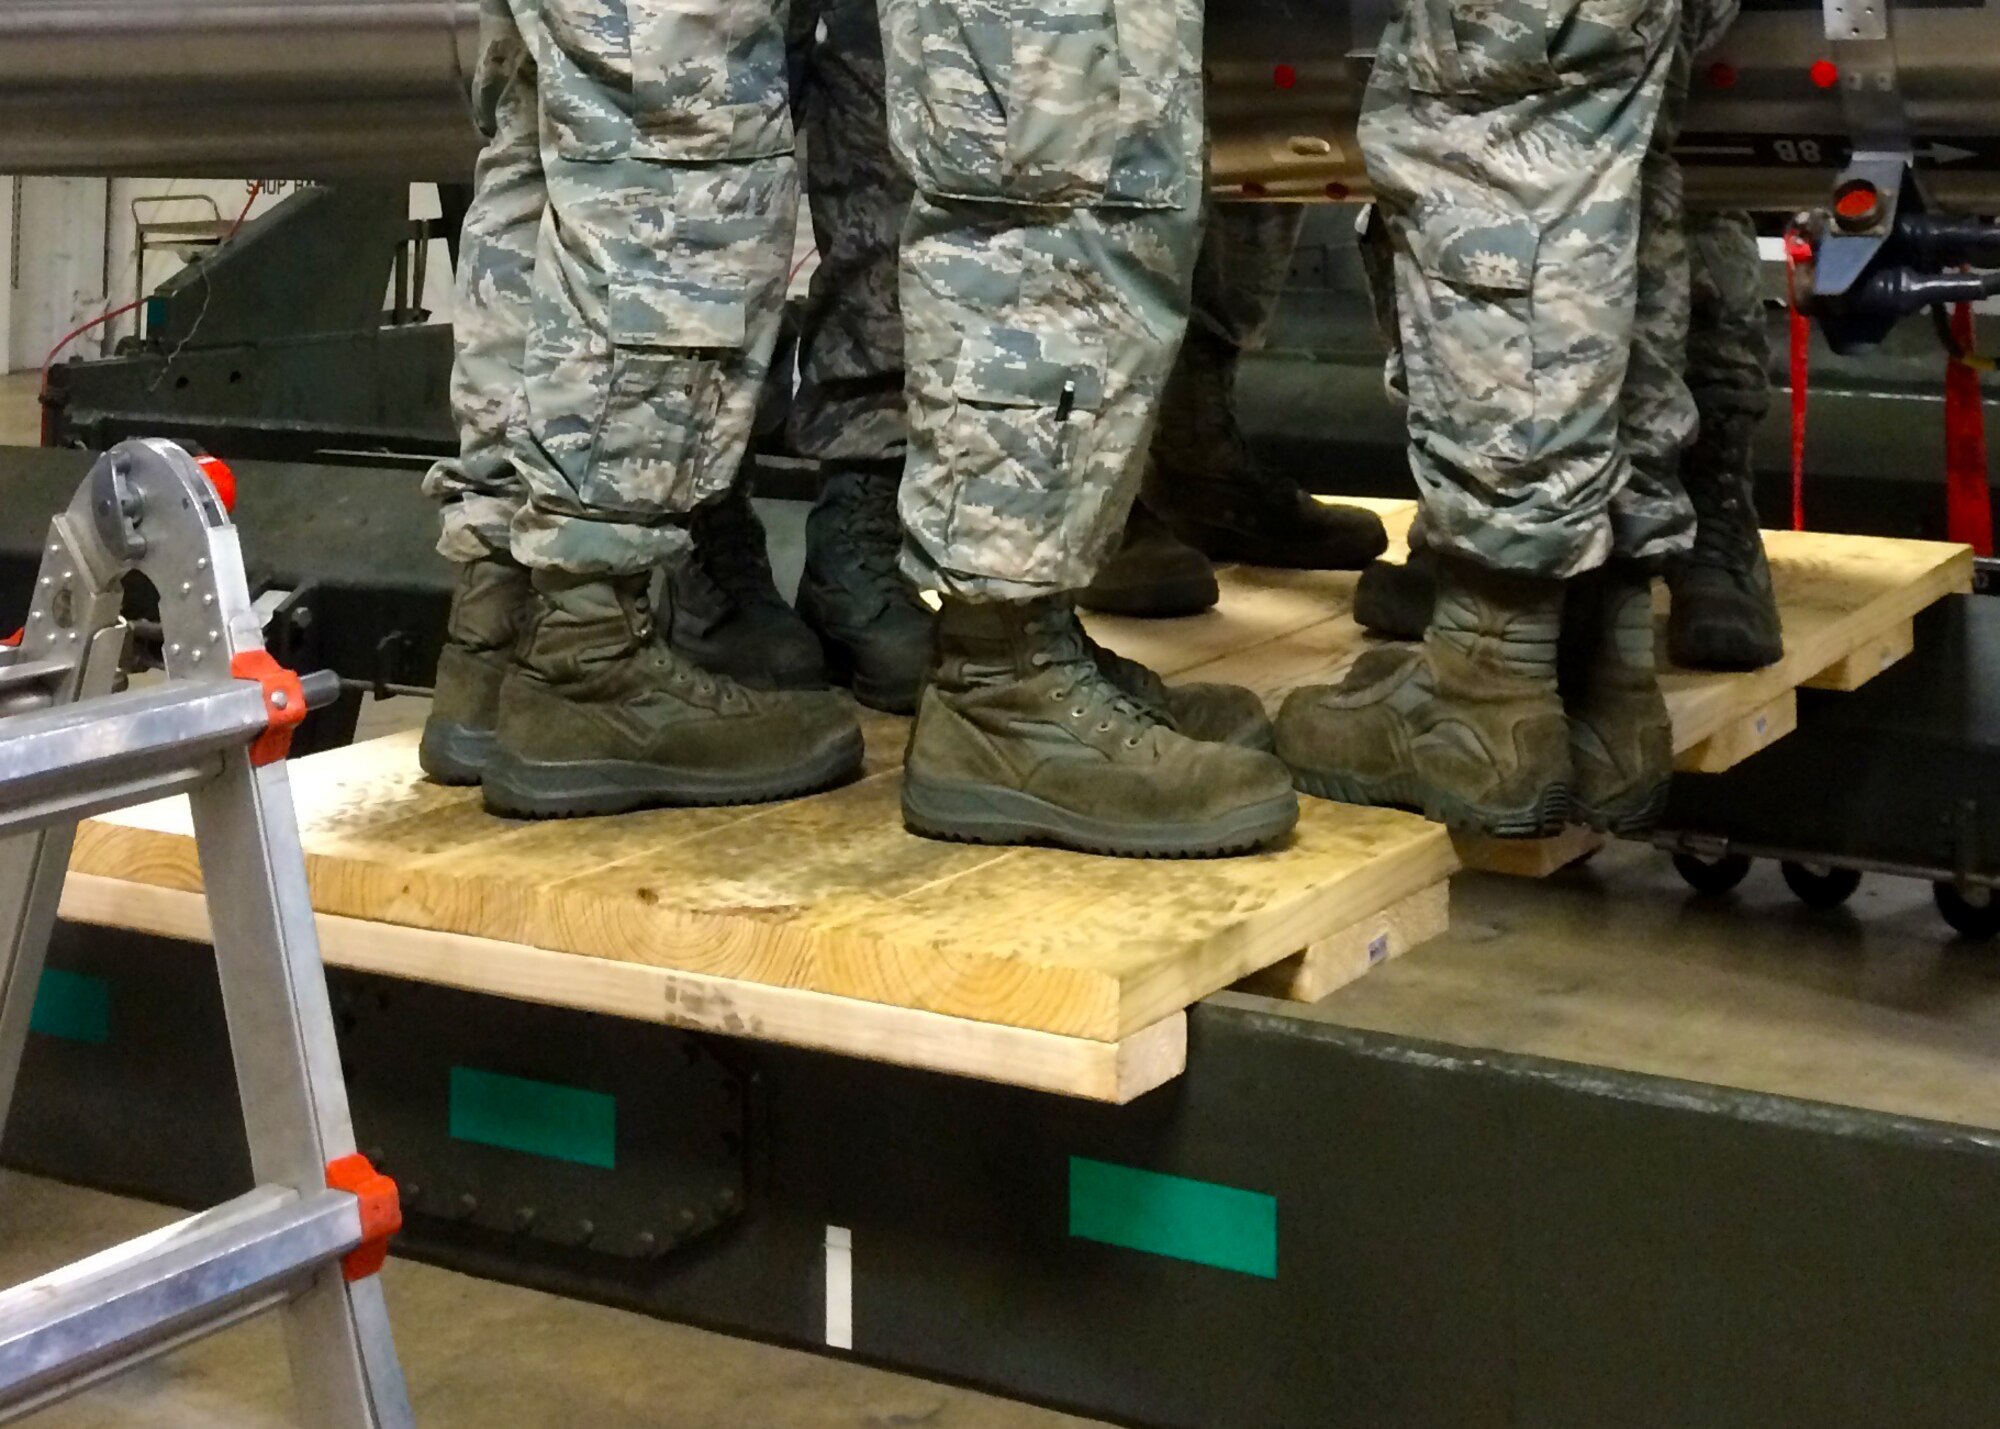 Seven Airmen conduct a weight-check of a platform designed and built by Staff Sgt. Daniel Babis, 2nd Munitions Squadron armament team chief, at Barksdale Air Force Base, La., March 18, 2016. The platform was created to address safety concerns by Airmen installing components on common rotary launchers, who previously had been forced to use step stools as they lifted 140 pound equipment up to the launcher. The platform has been tested to withstand up to 1250 pounds. (U.S. Air Force Courtesy photo)